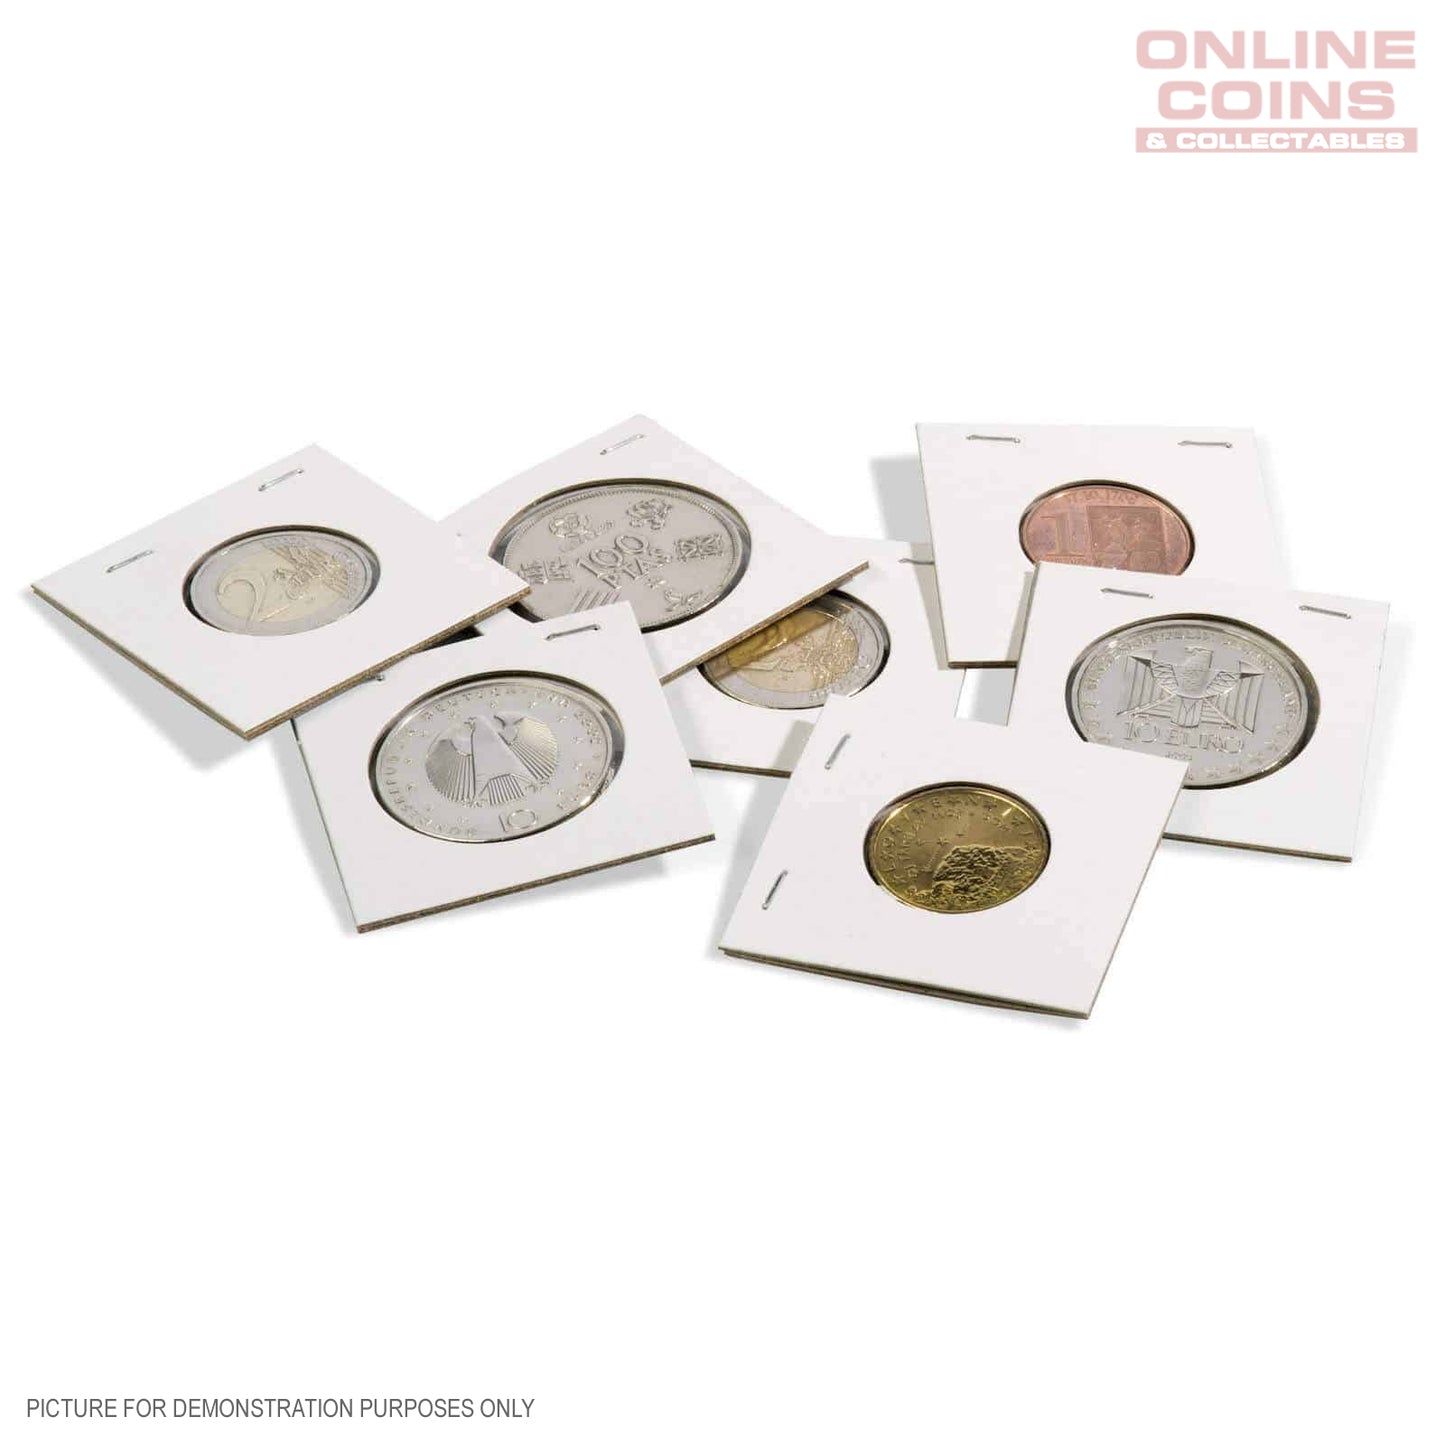 Lighthouse TACK Staple 2 x 2 Coin Holders x 100, 39.5 mm Listing is for Pack of 100 (Suitable For Australian Crowns)